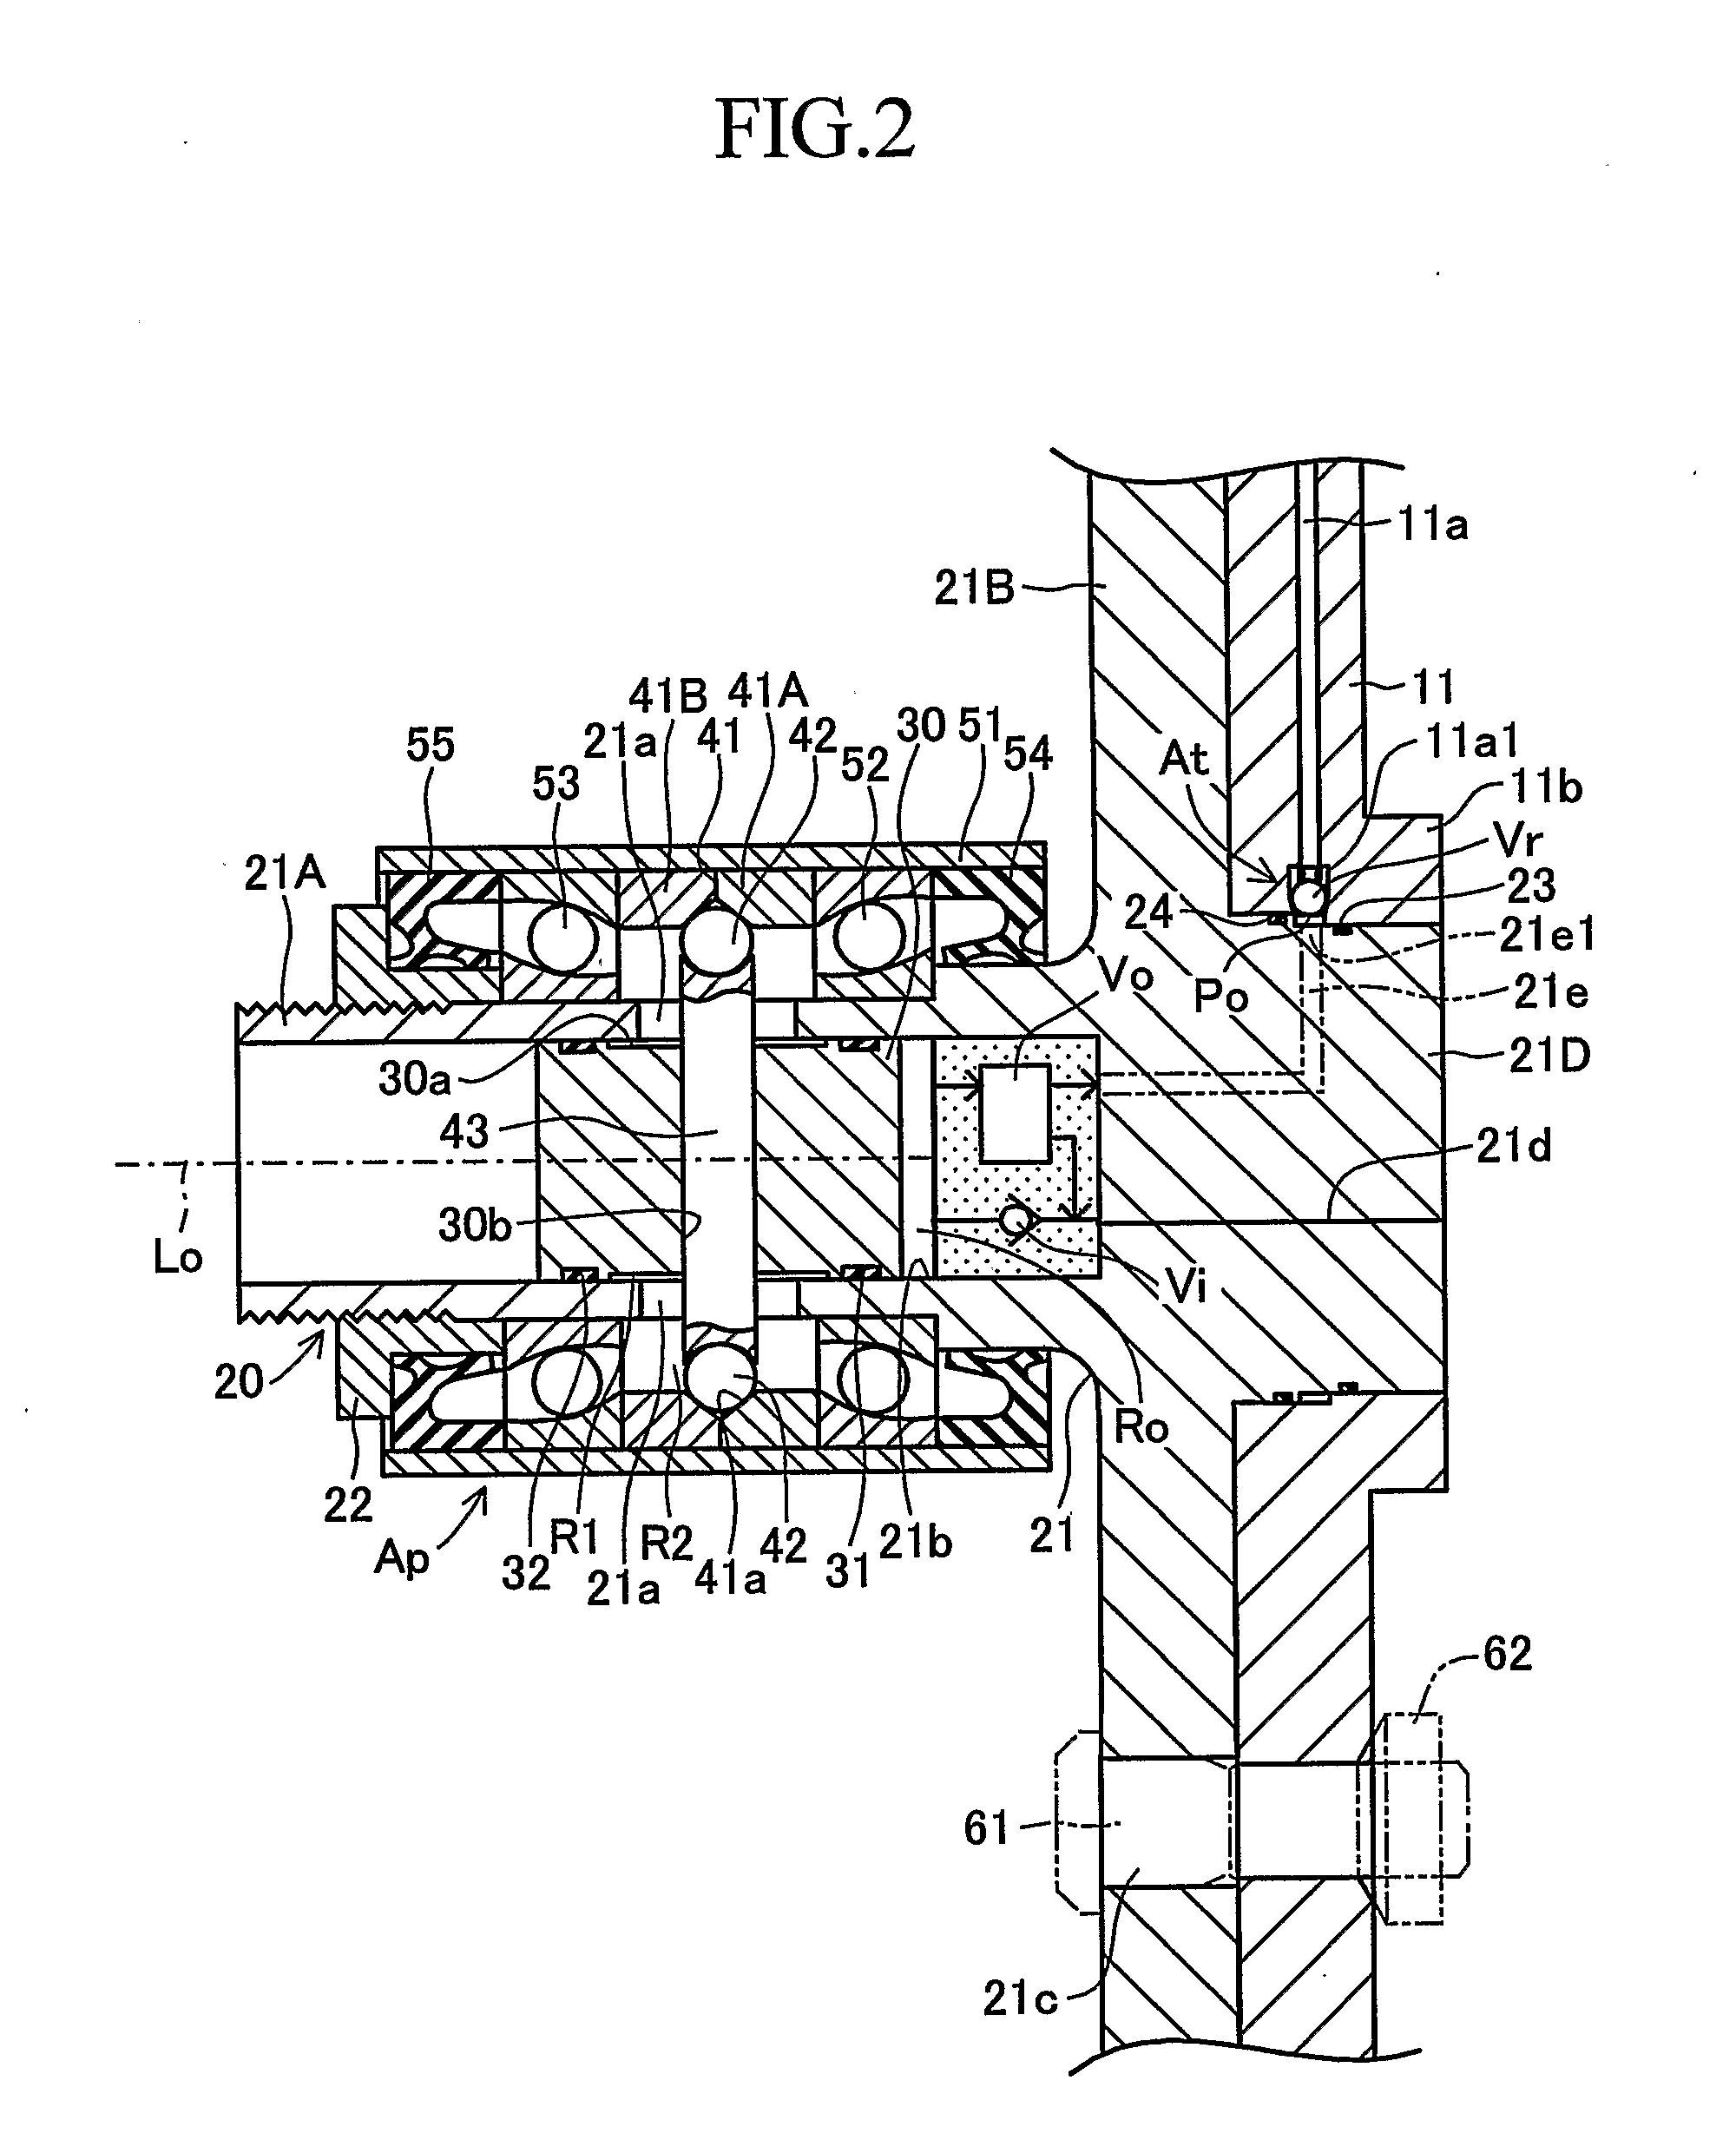 Apparatus for controlling tire inflation pressure